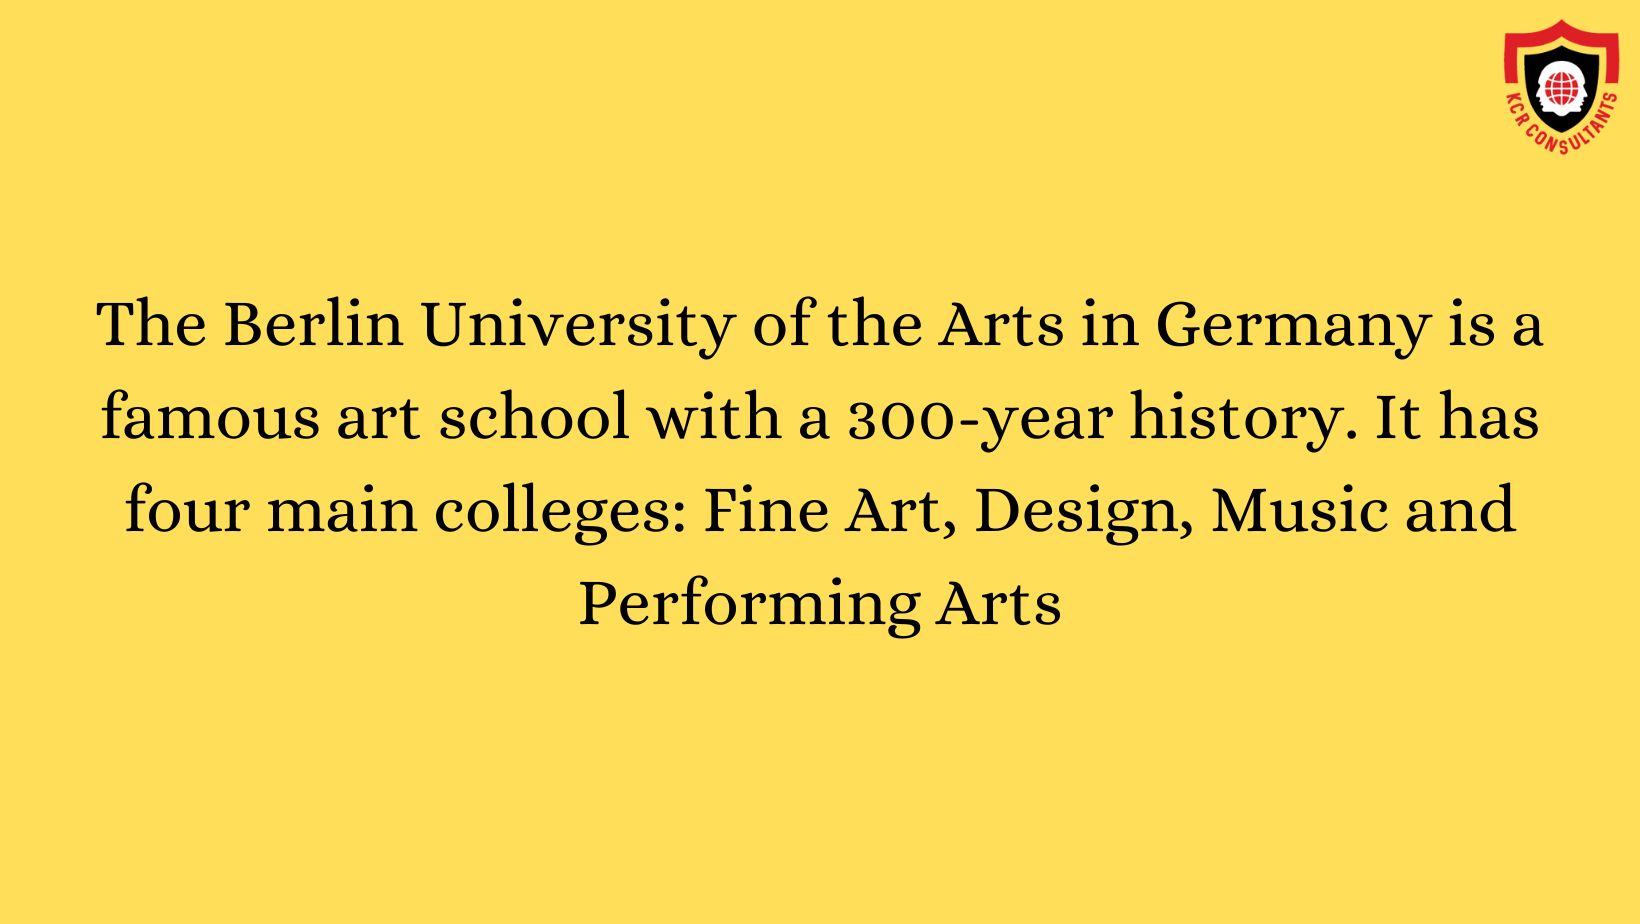 BERLIN UNIVERSITY OF THE ARTS (UDK) - KCR CONSULTANTS - Introduction